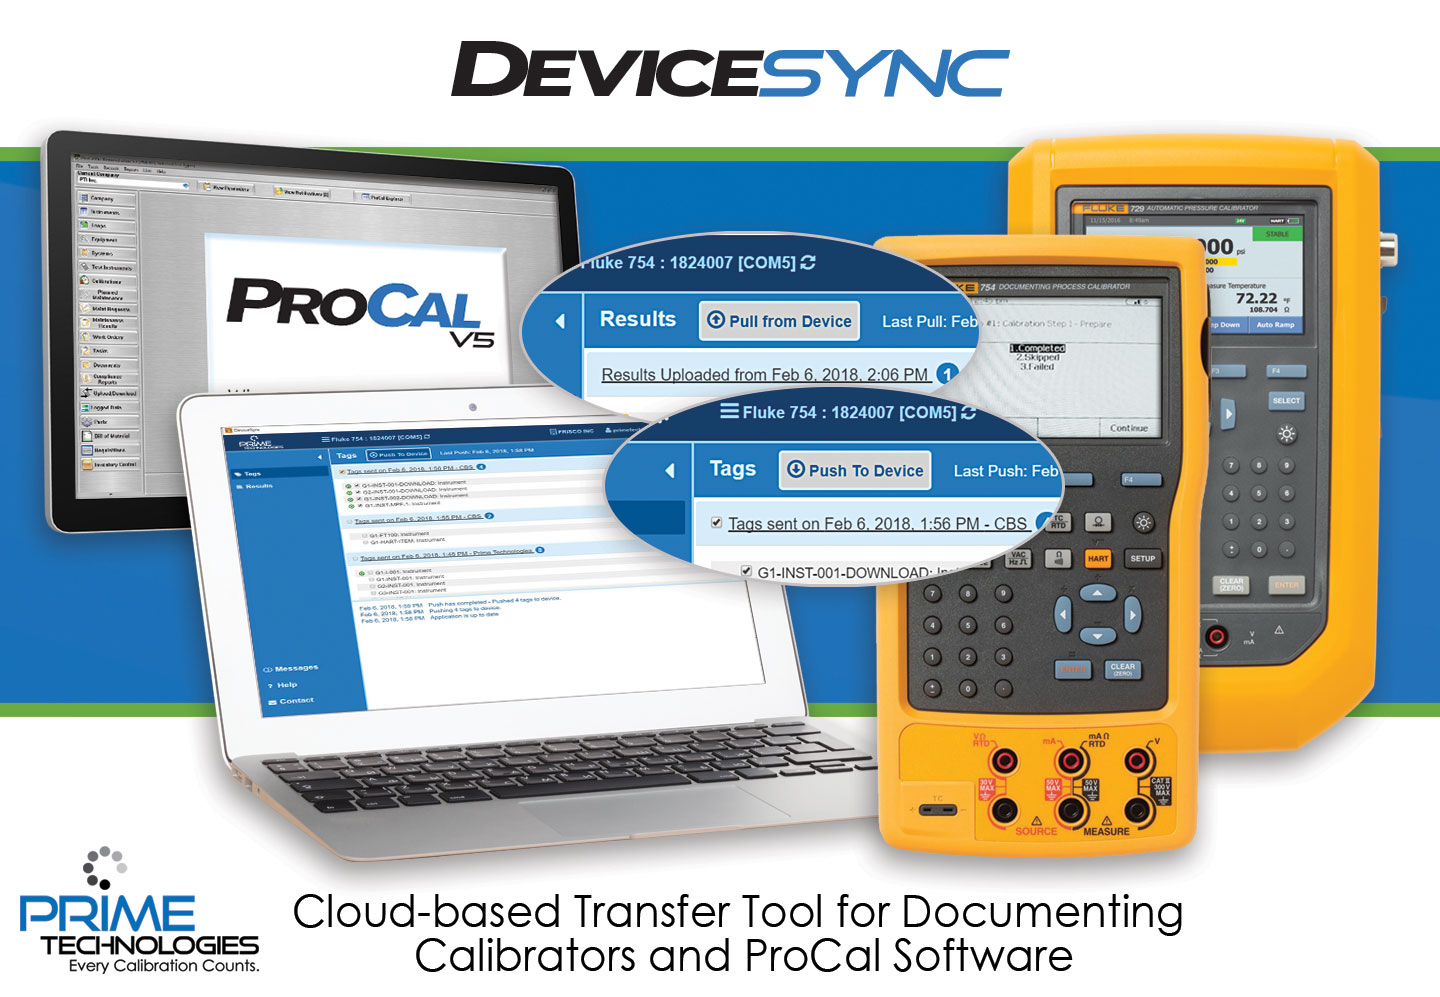 DeviceSync Documenting Calibrator Tool for Calibration Software